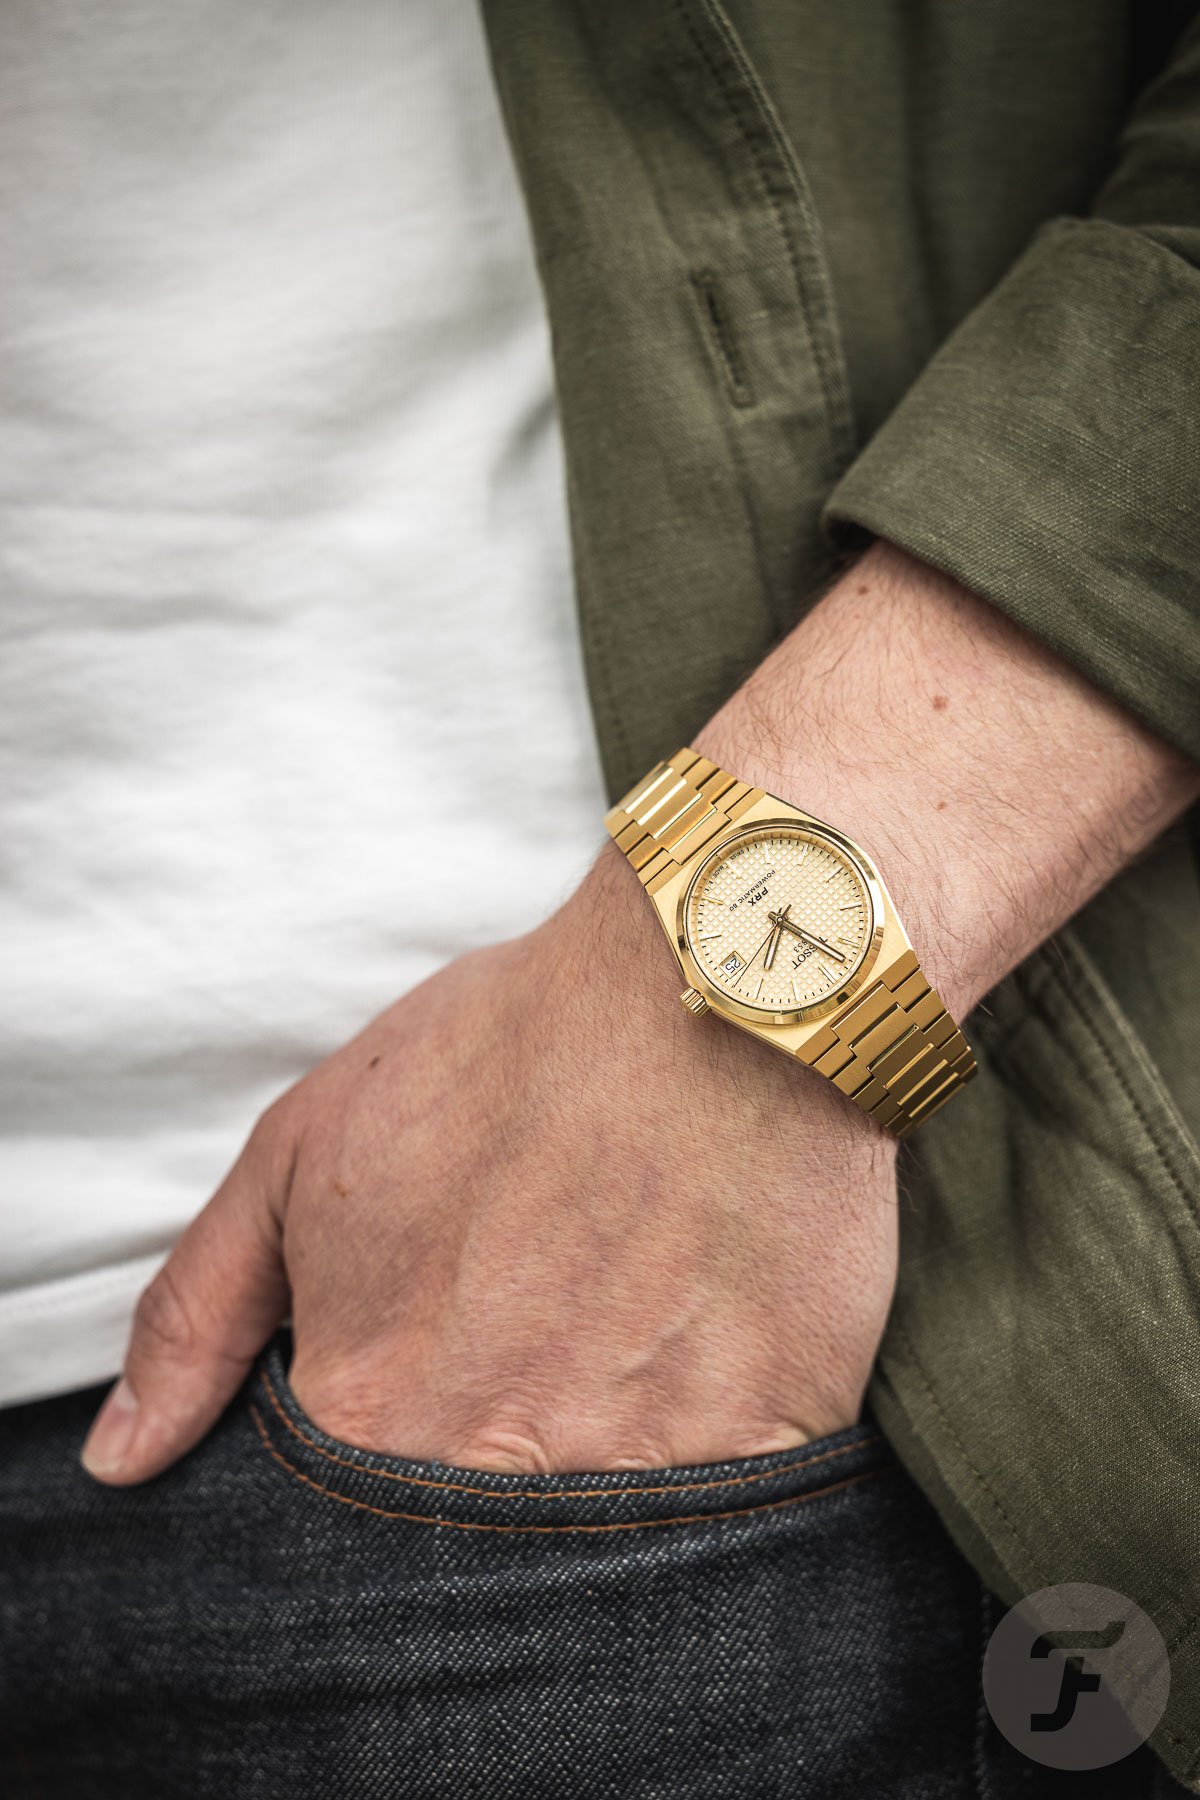 Golden Times For The Tissot PRX Powermatic 80 35mm